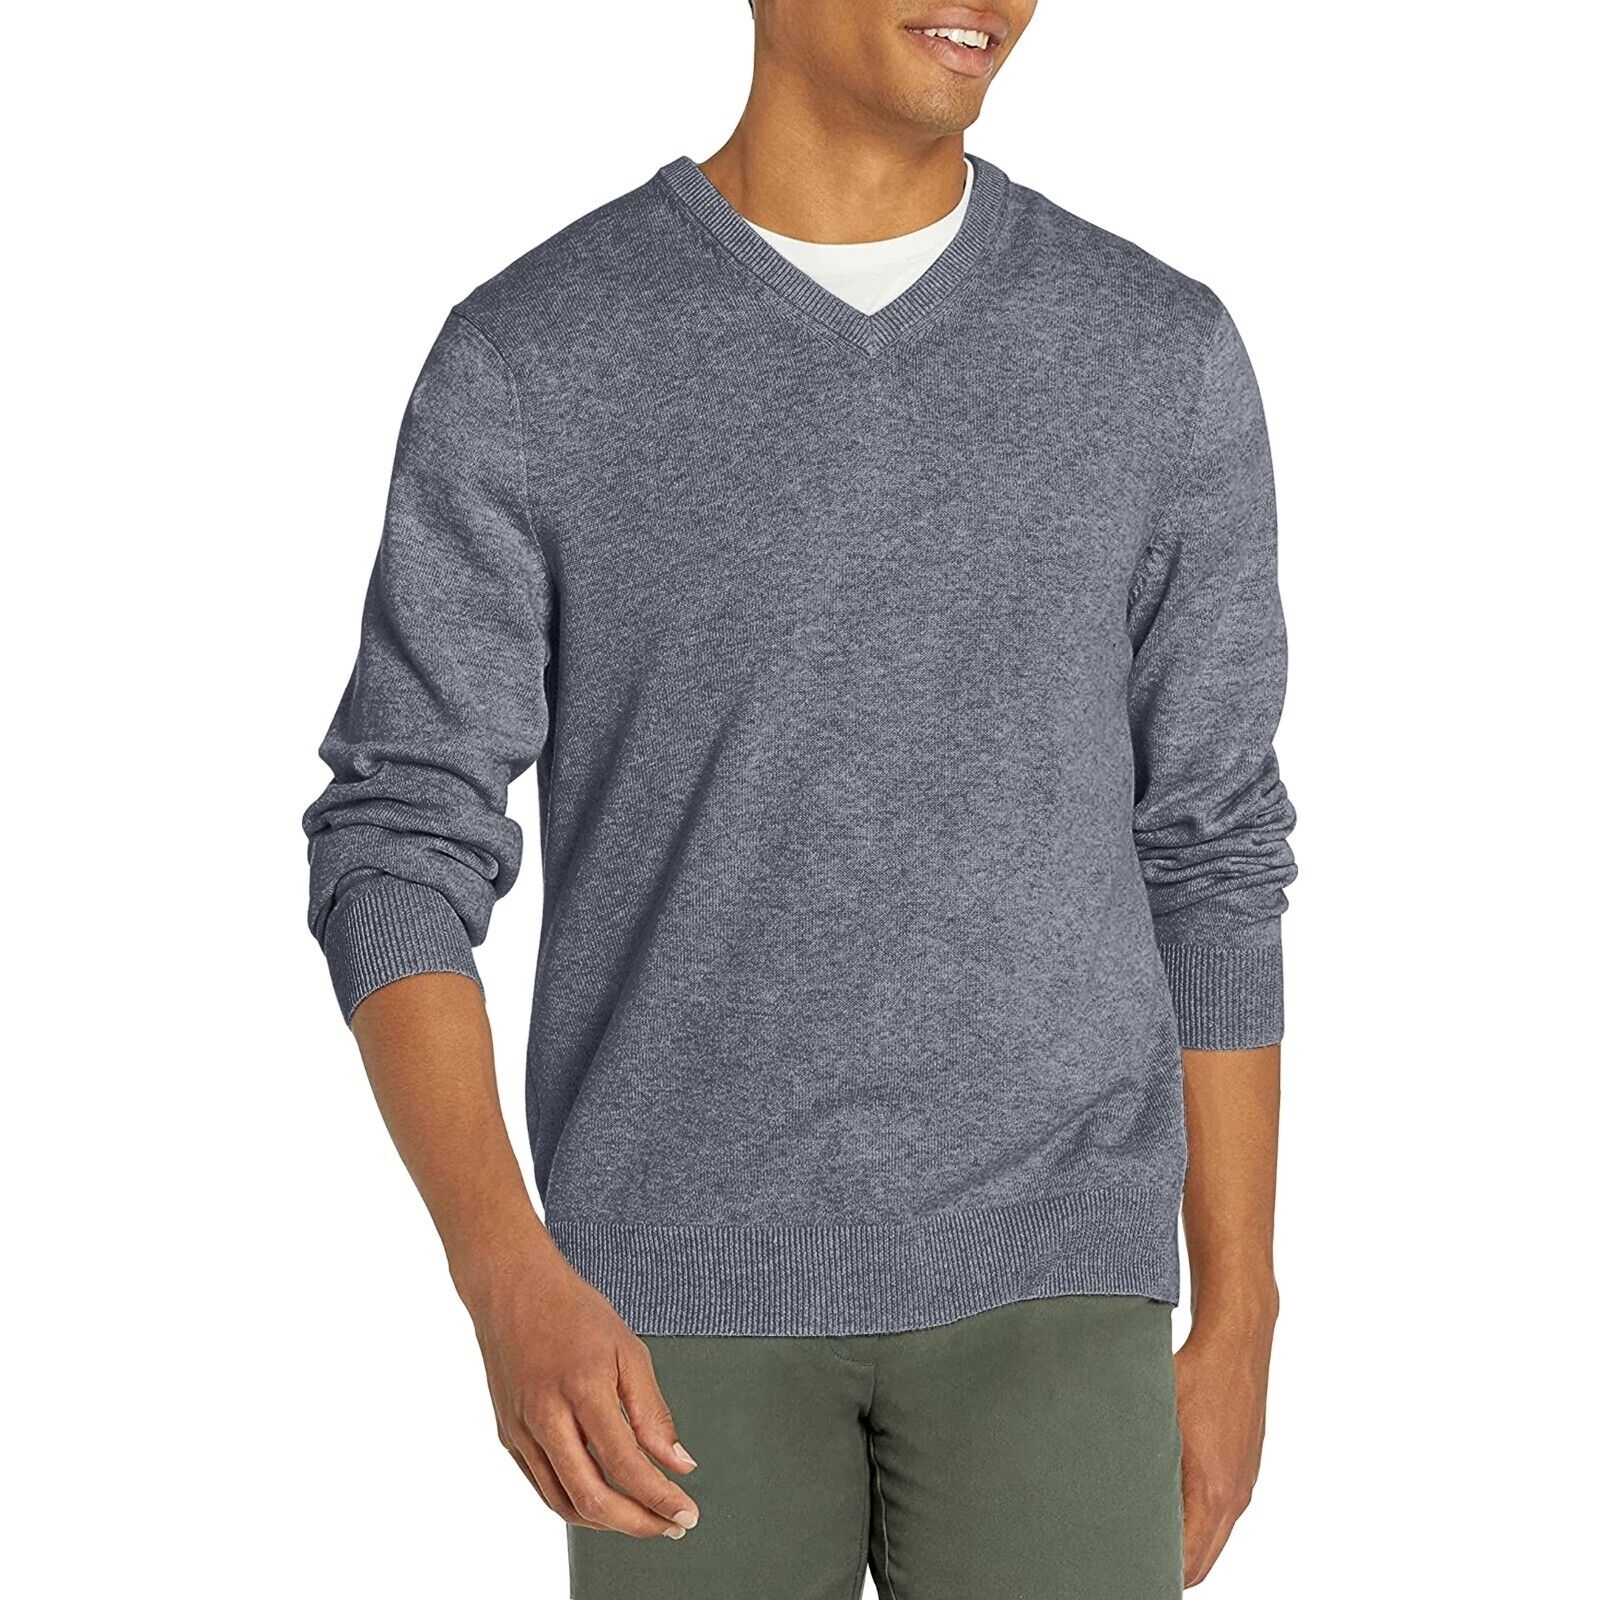 Men's Casual Ultra-Soft Slim Fit Warm Knit Pullover V-Neck Sweater For Winter - Grey, Small